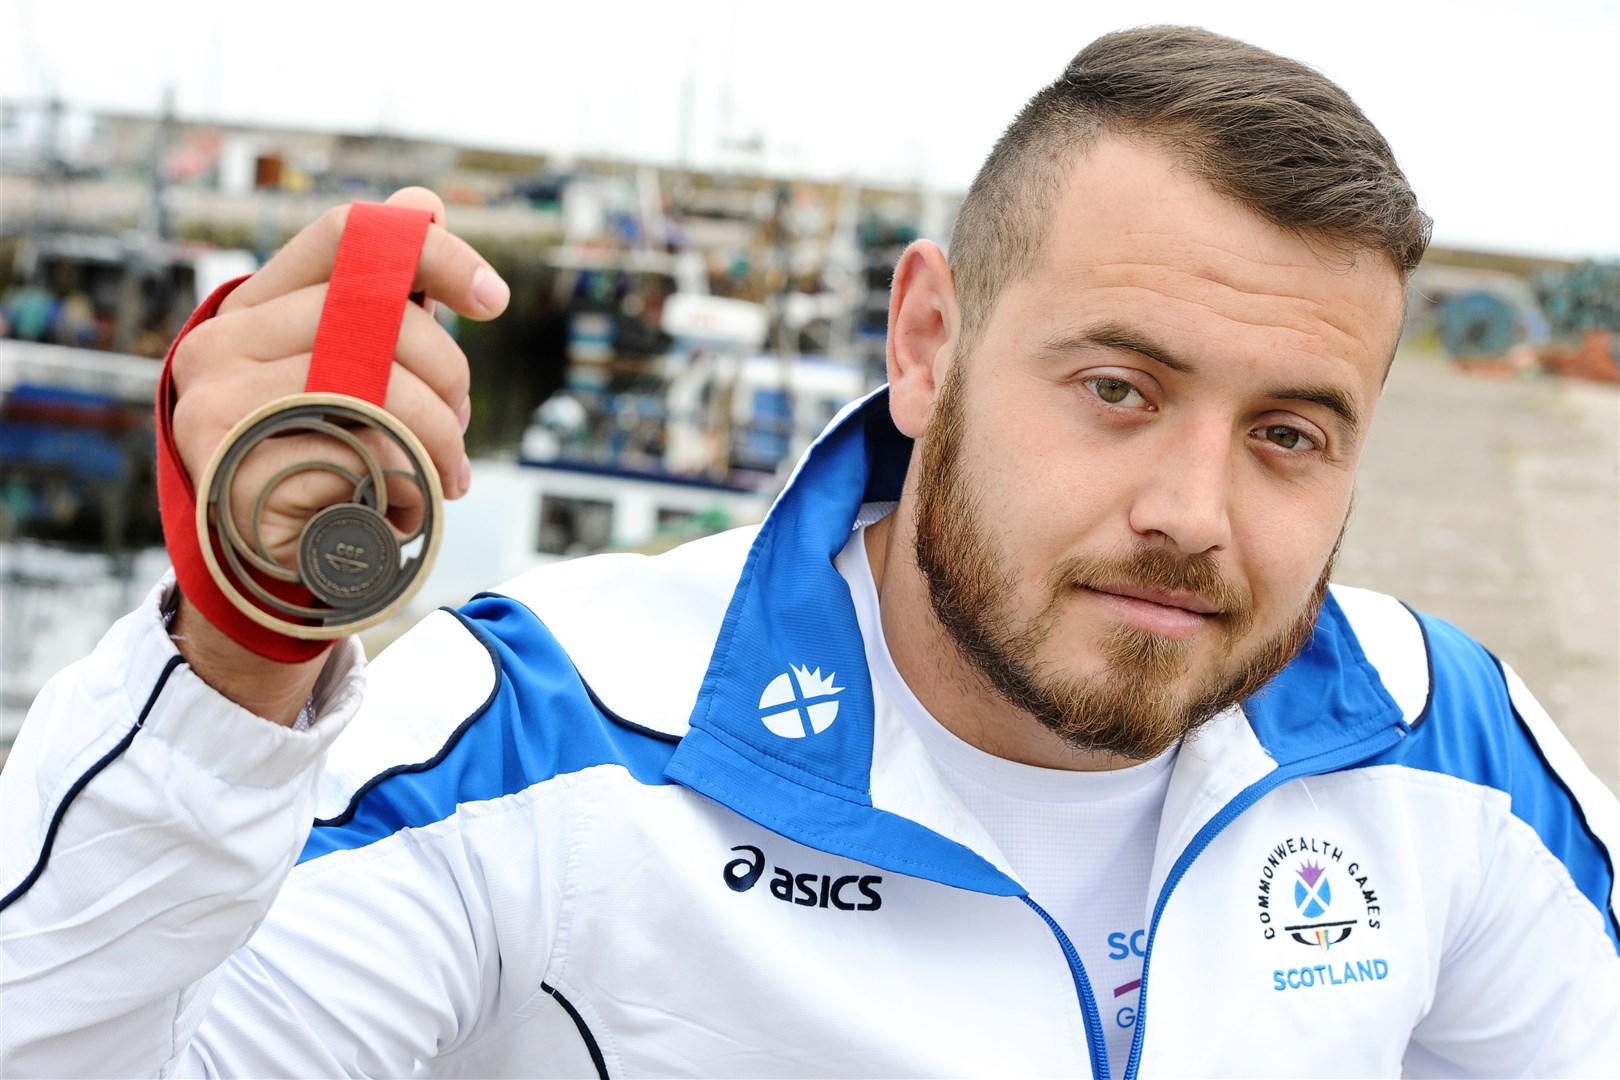 Back in Burghead with his Glasgow bronze medal - Mark Dry. Picture: Daniel Forsyth.